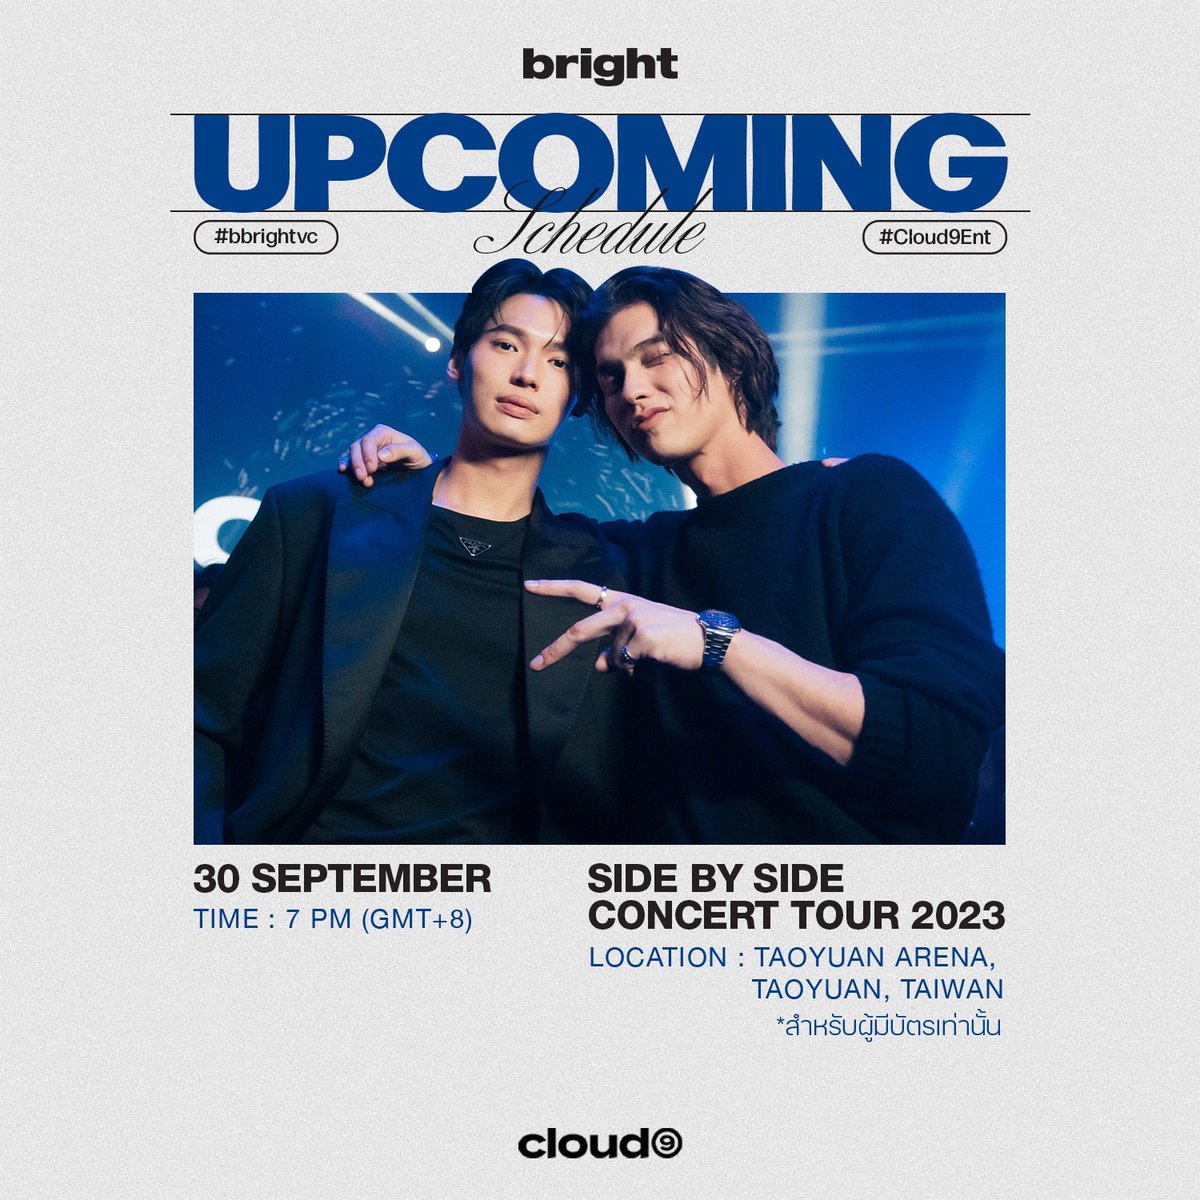 Today, please follow and support BRIGHT and WIN at the SIDE BY SIDE CONCERT TOUR 2023 in TAIWAN as well🤍

#BrightWinSBSTour2023 
#bbrightvc 
#winmetawin